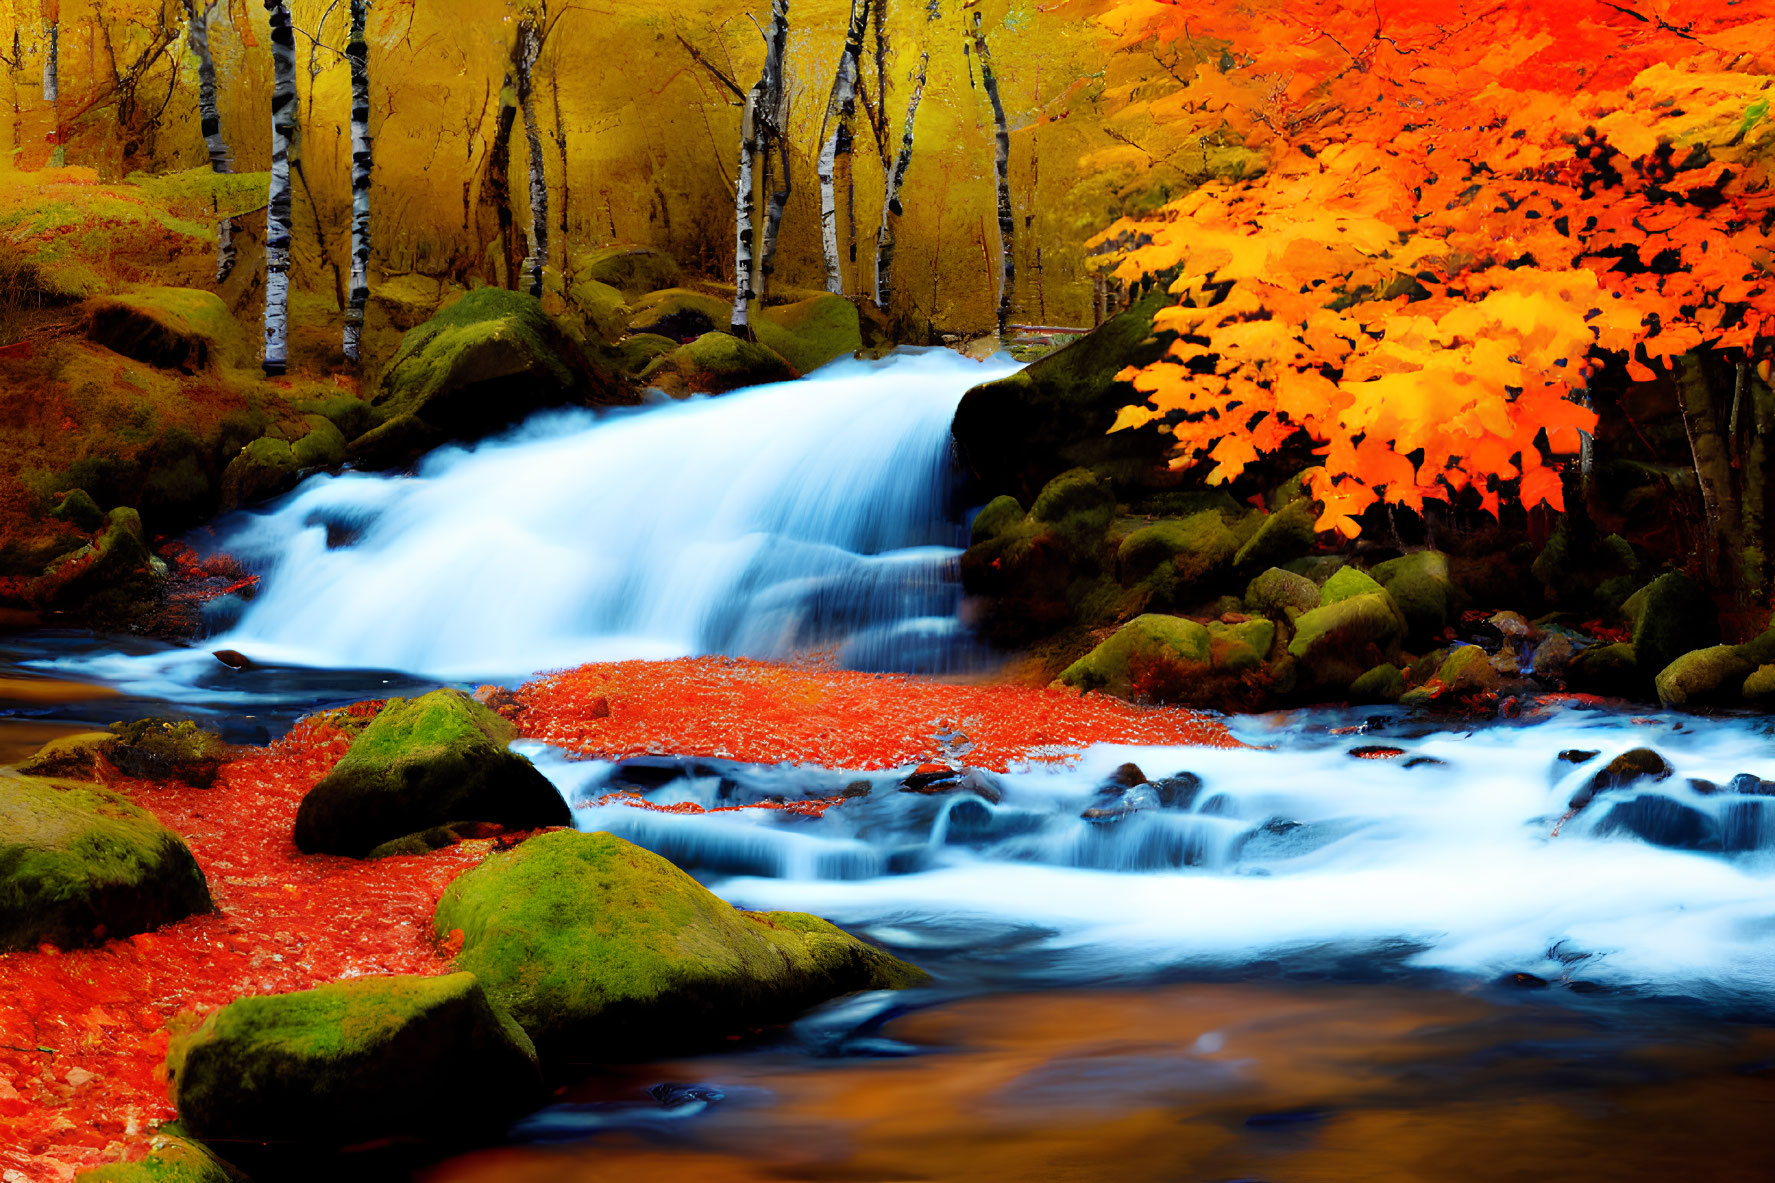 Scenic autumn waterfall with colorful foliage